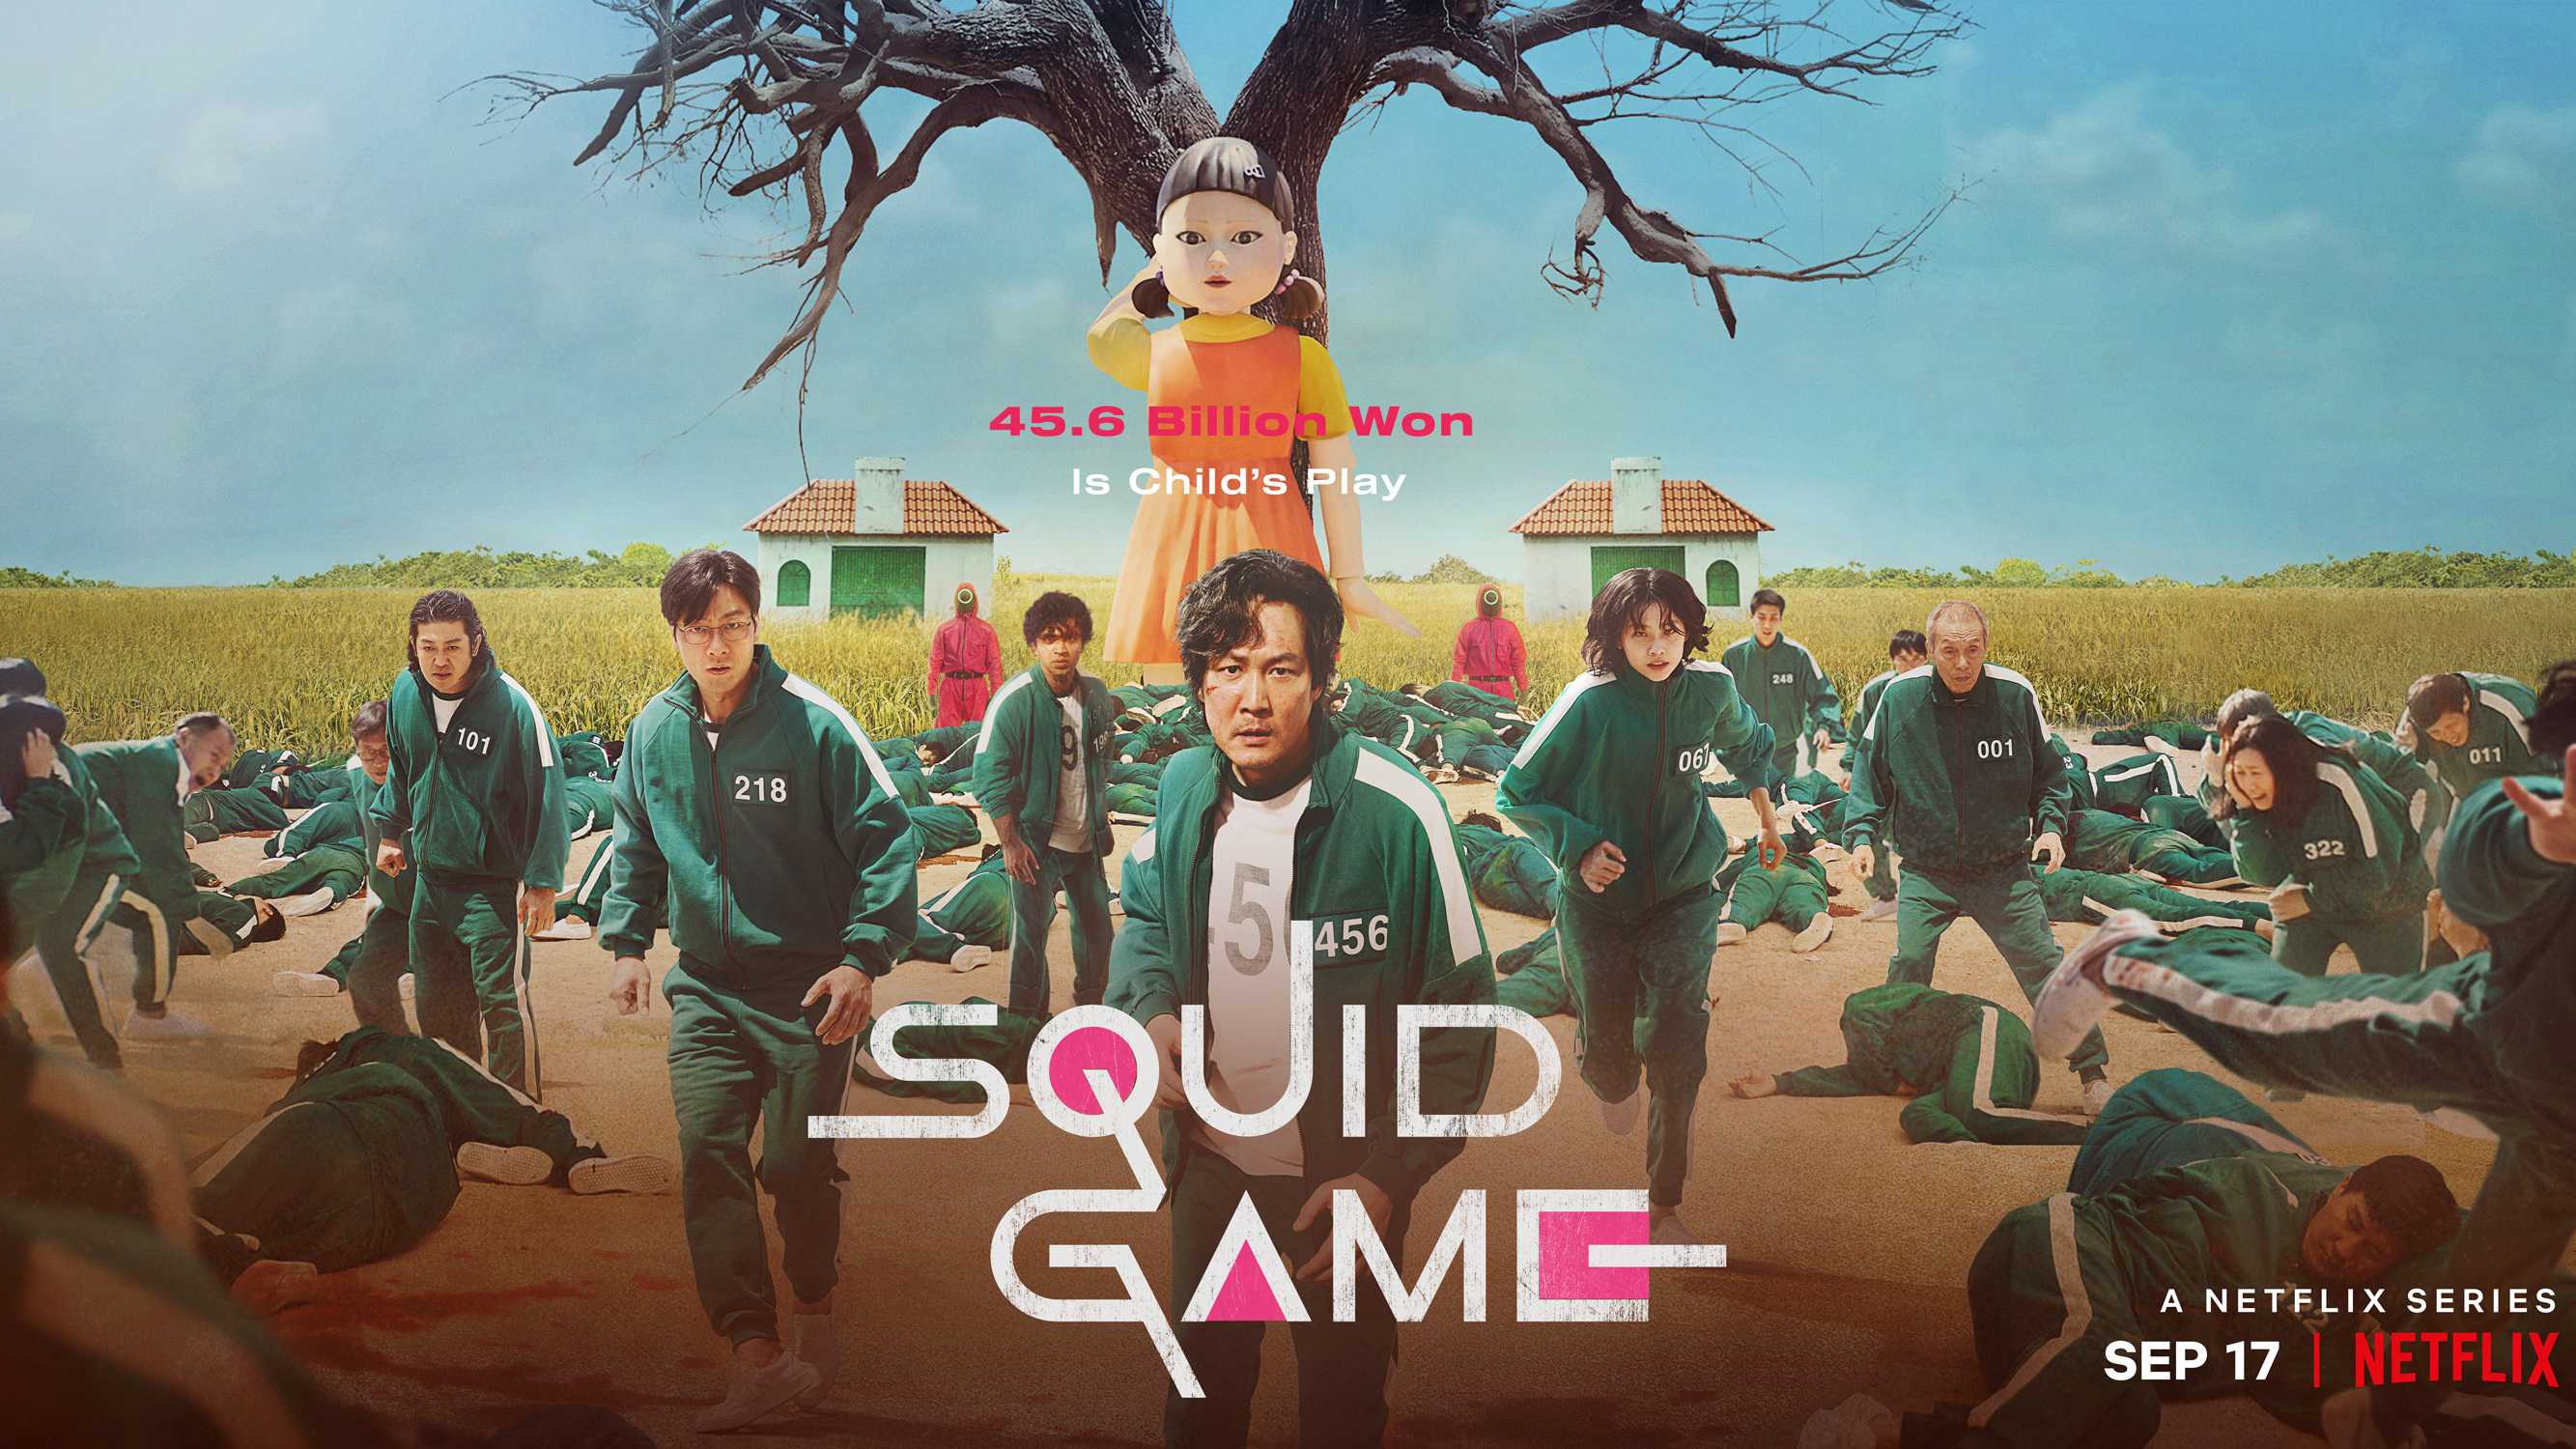 Squid Game Netflix 2021 Wallpapers Full HD Free Download